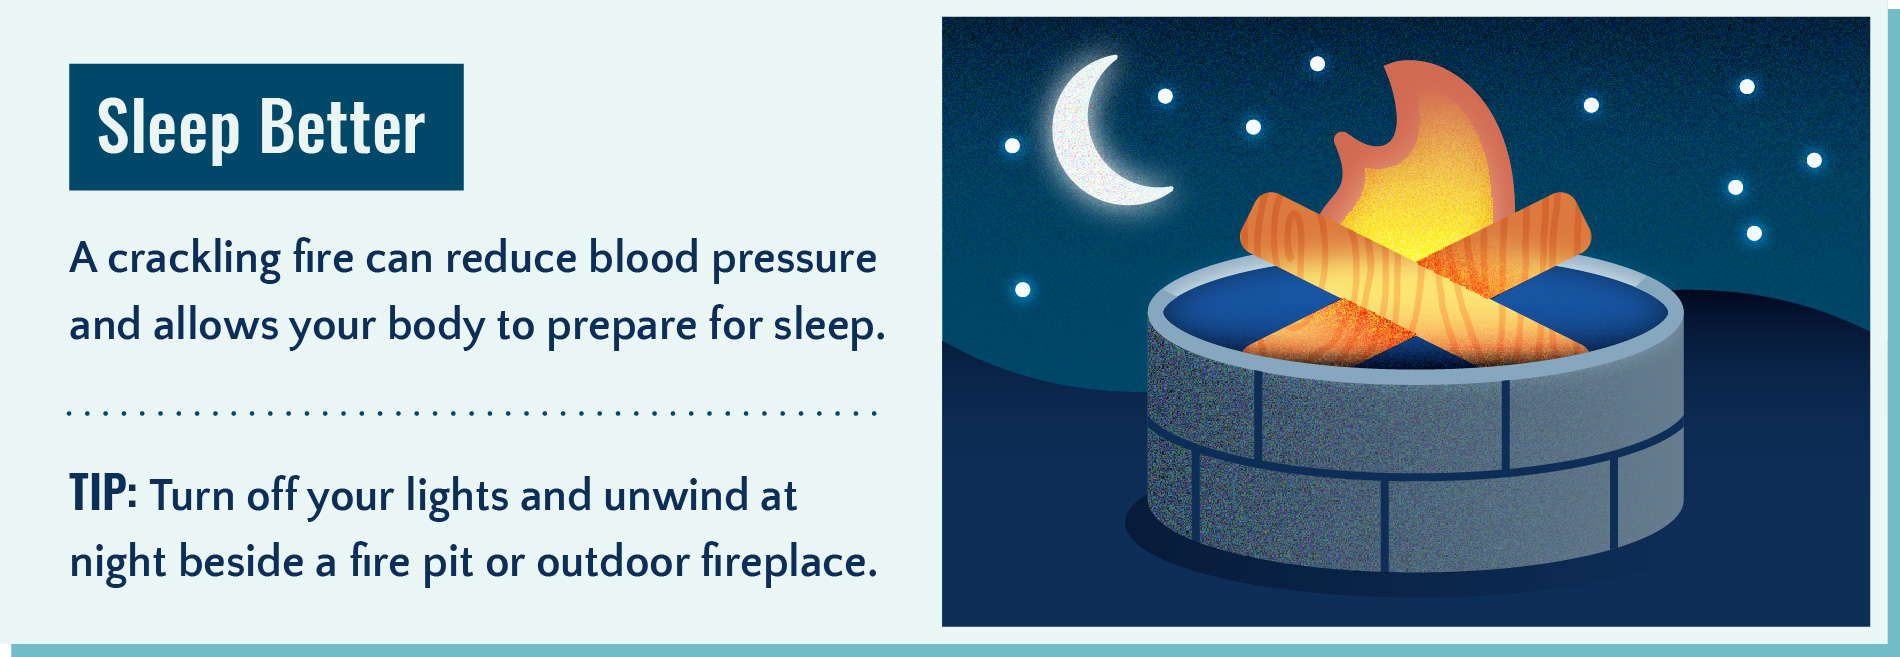 Spending time outdoors can help you sleep better at night.